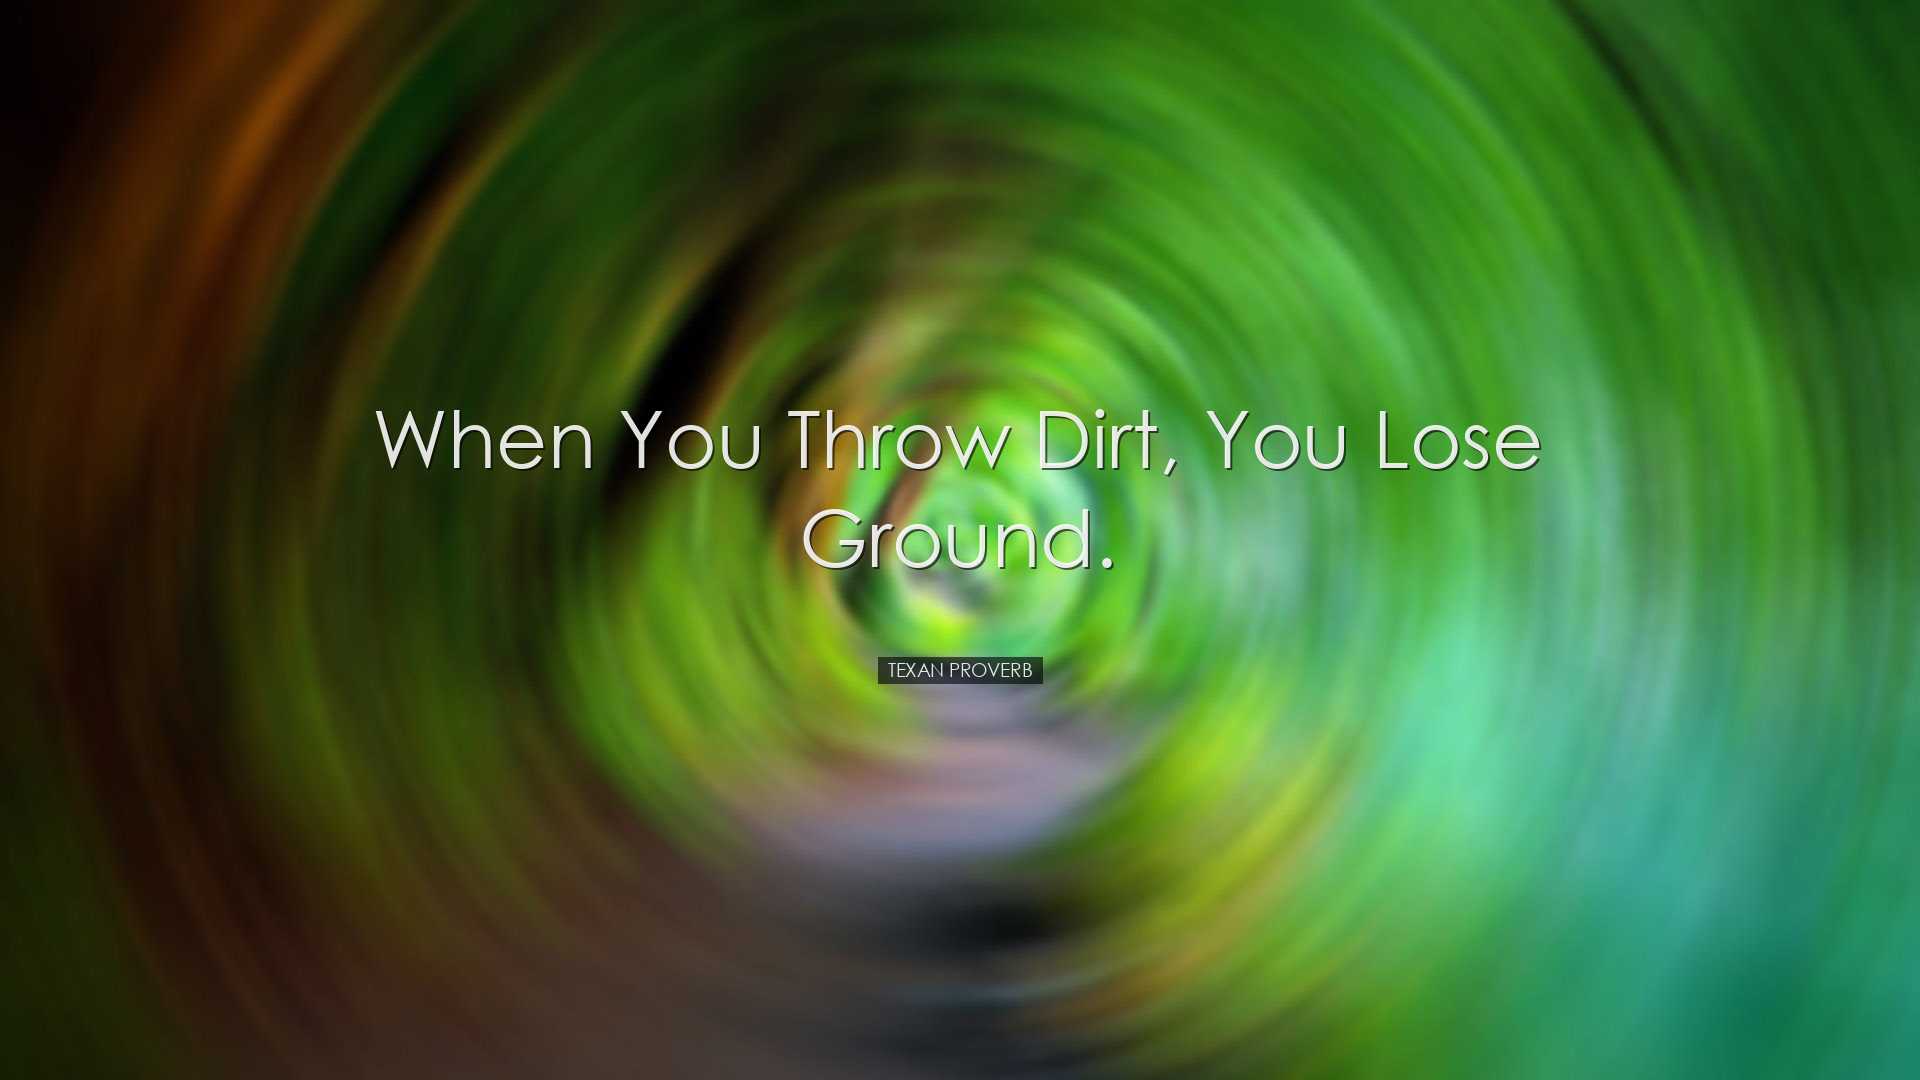 When you throw dirt, you lose ground. - Texan Proverb